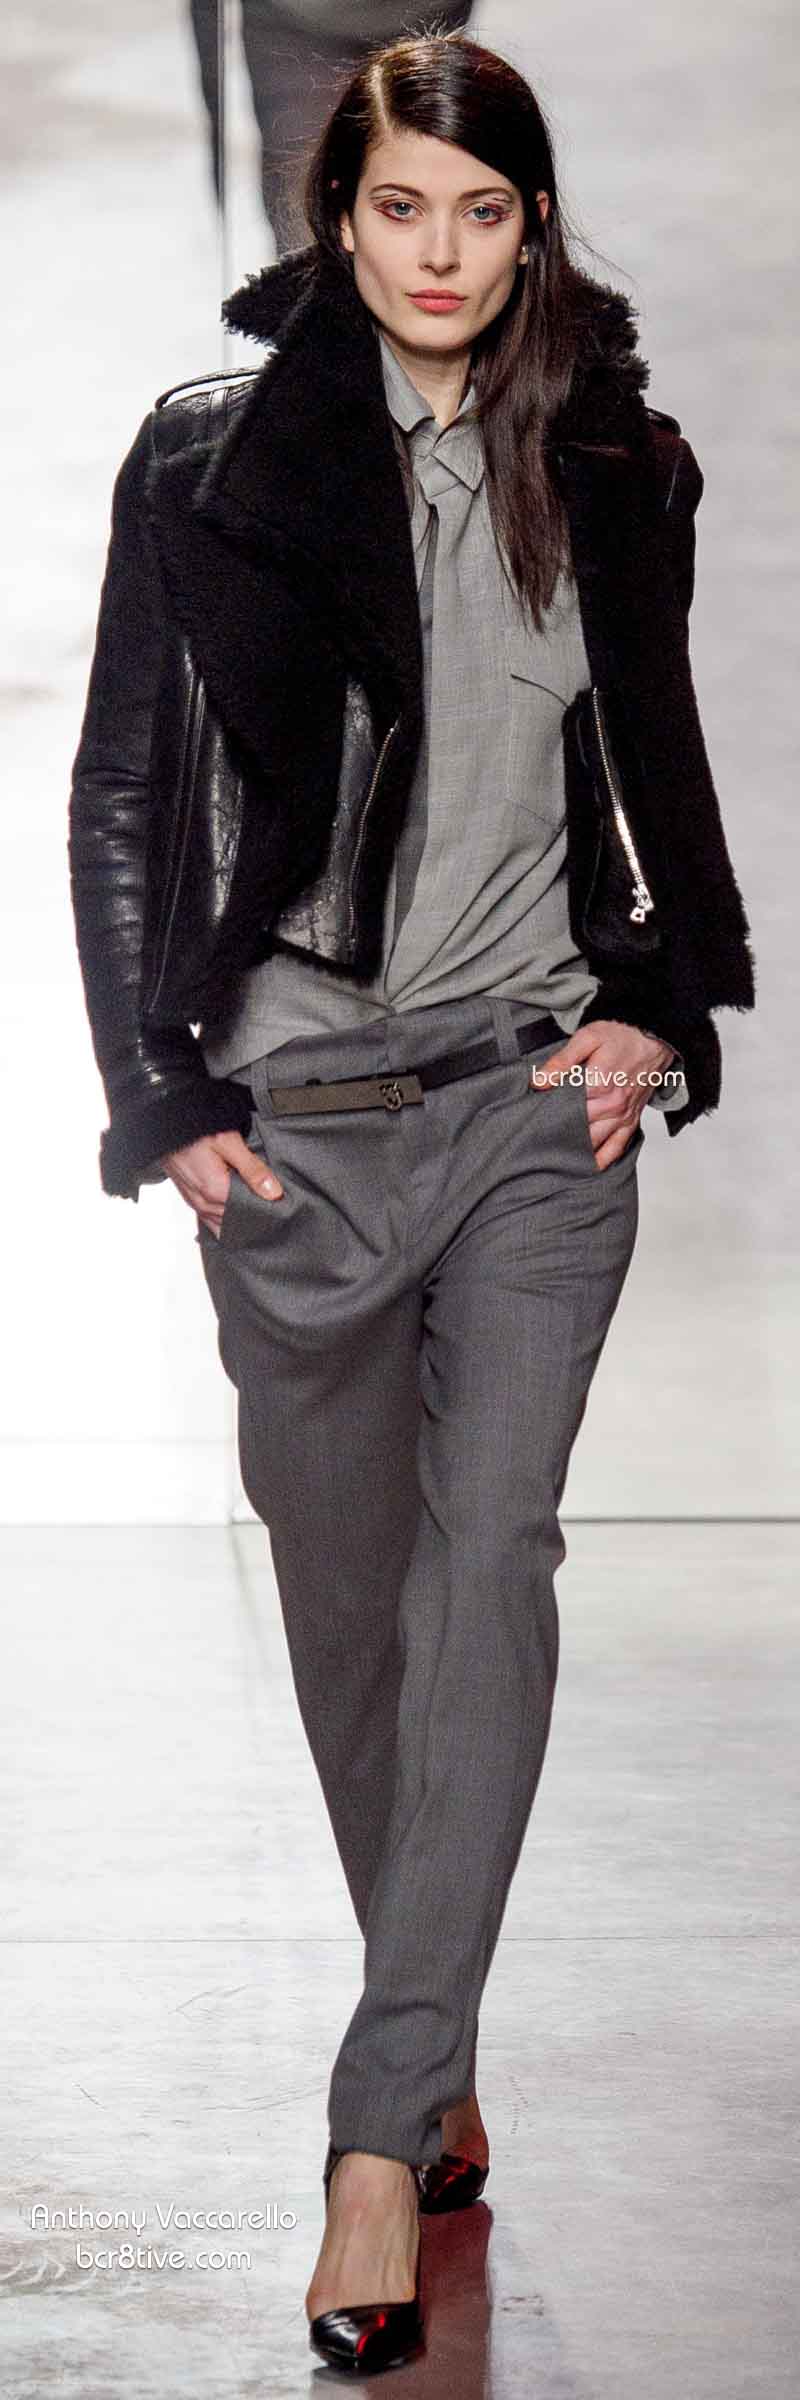 Fall 2014 Menswear Inspired Fashion - Anthony Vaccarello